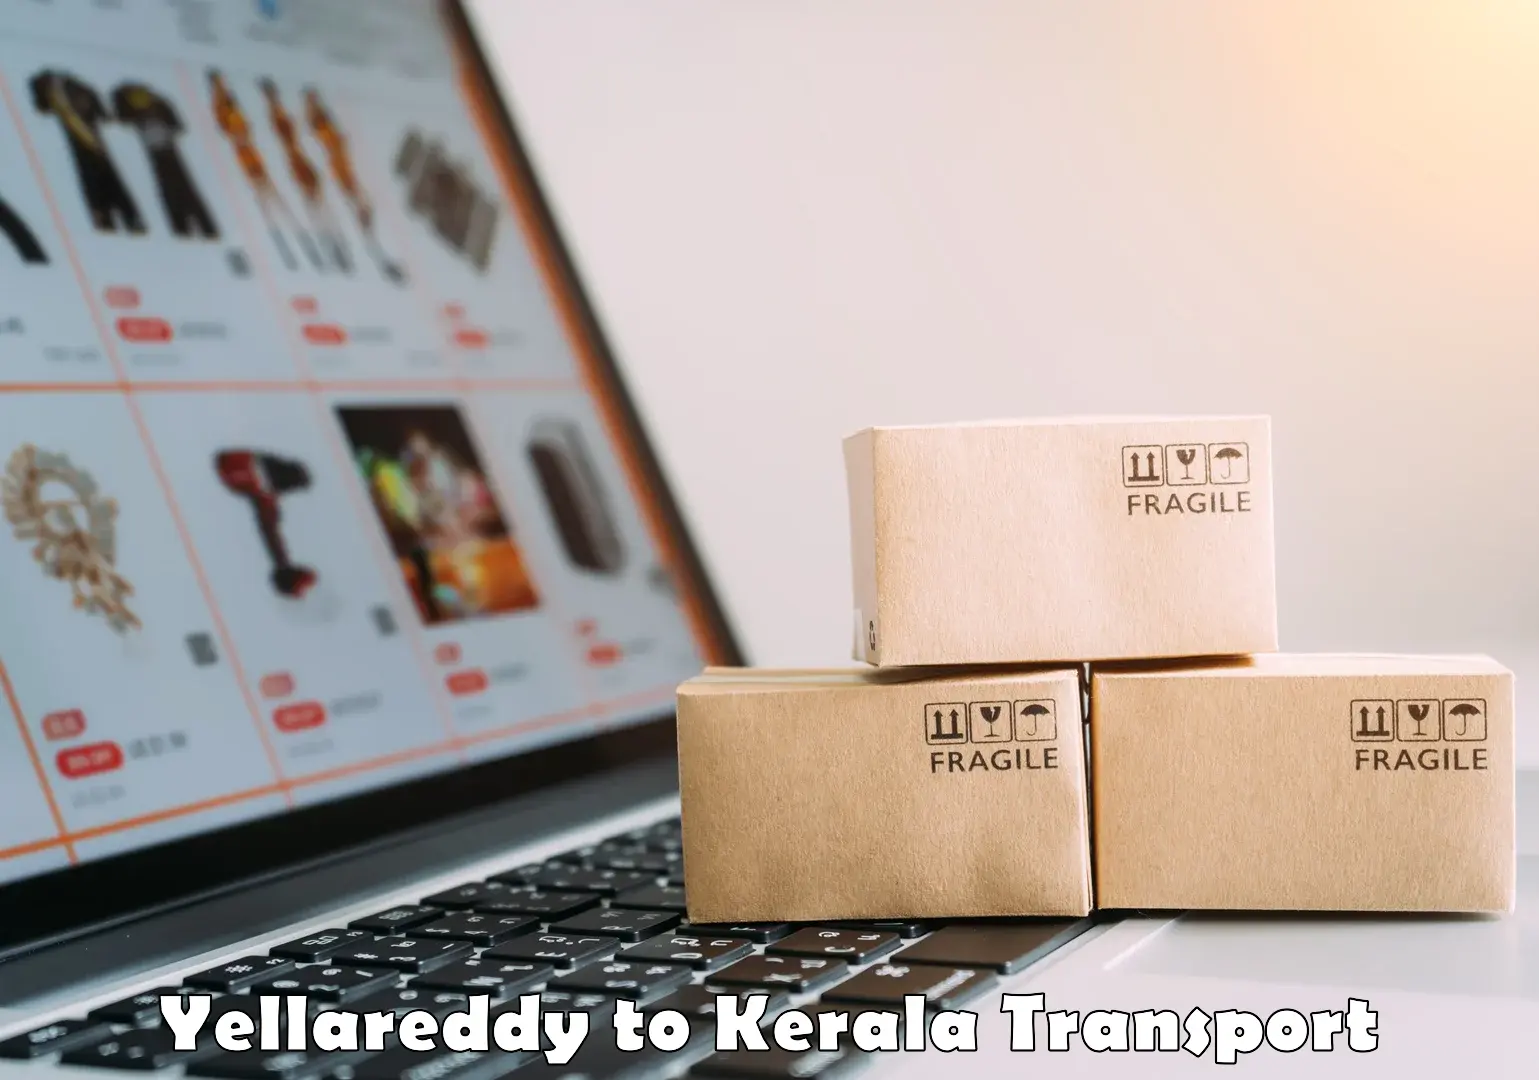 Delivery service Yellareddy to Kannur